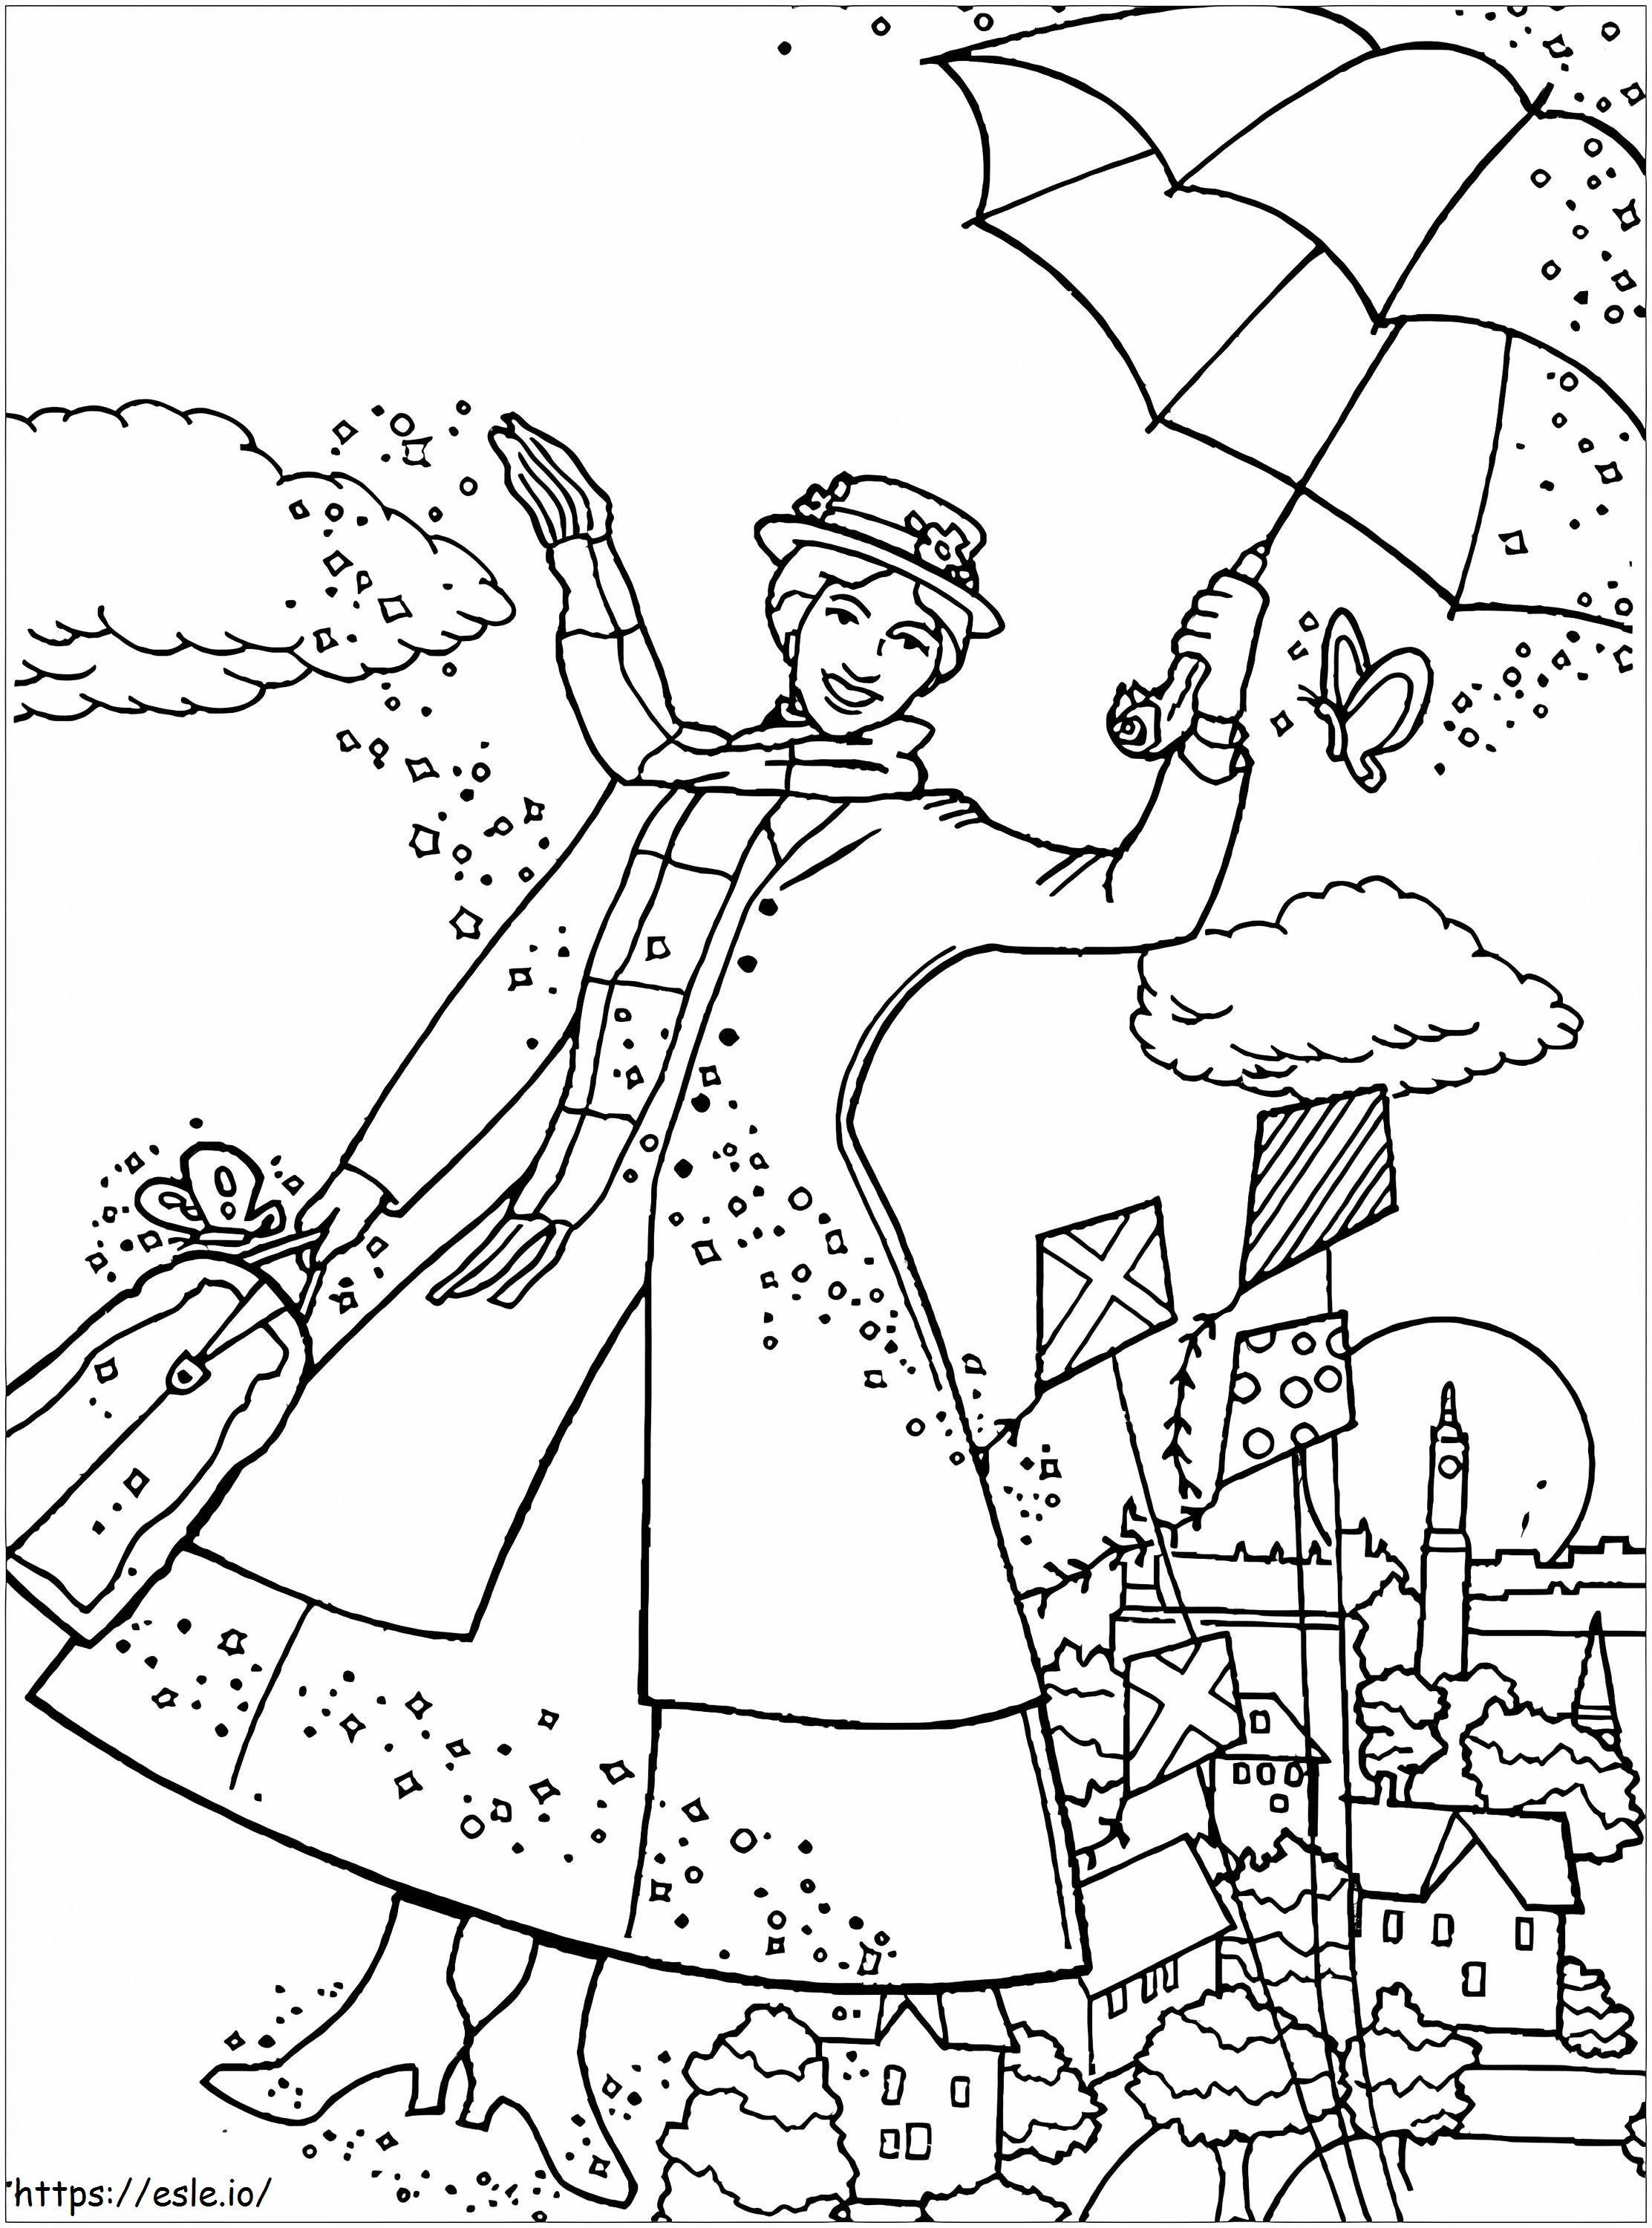 Simple Mary Poppins coloring page